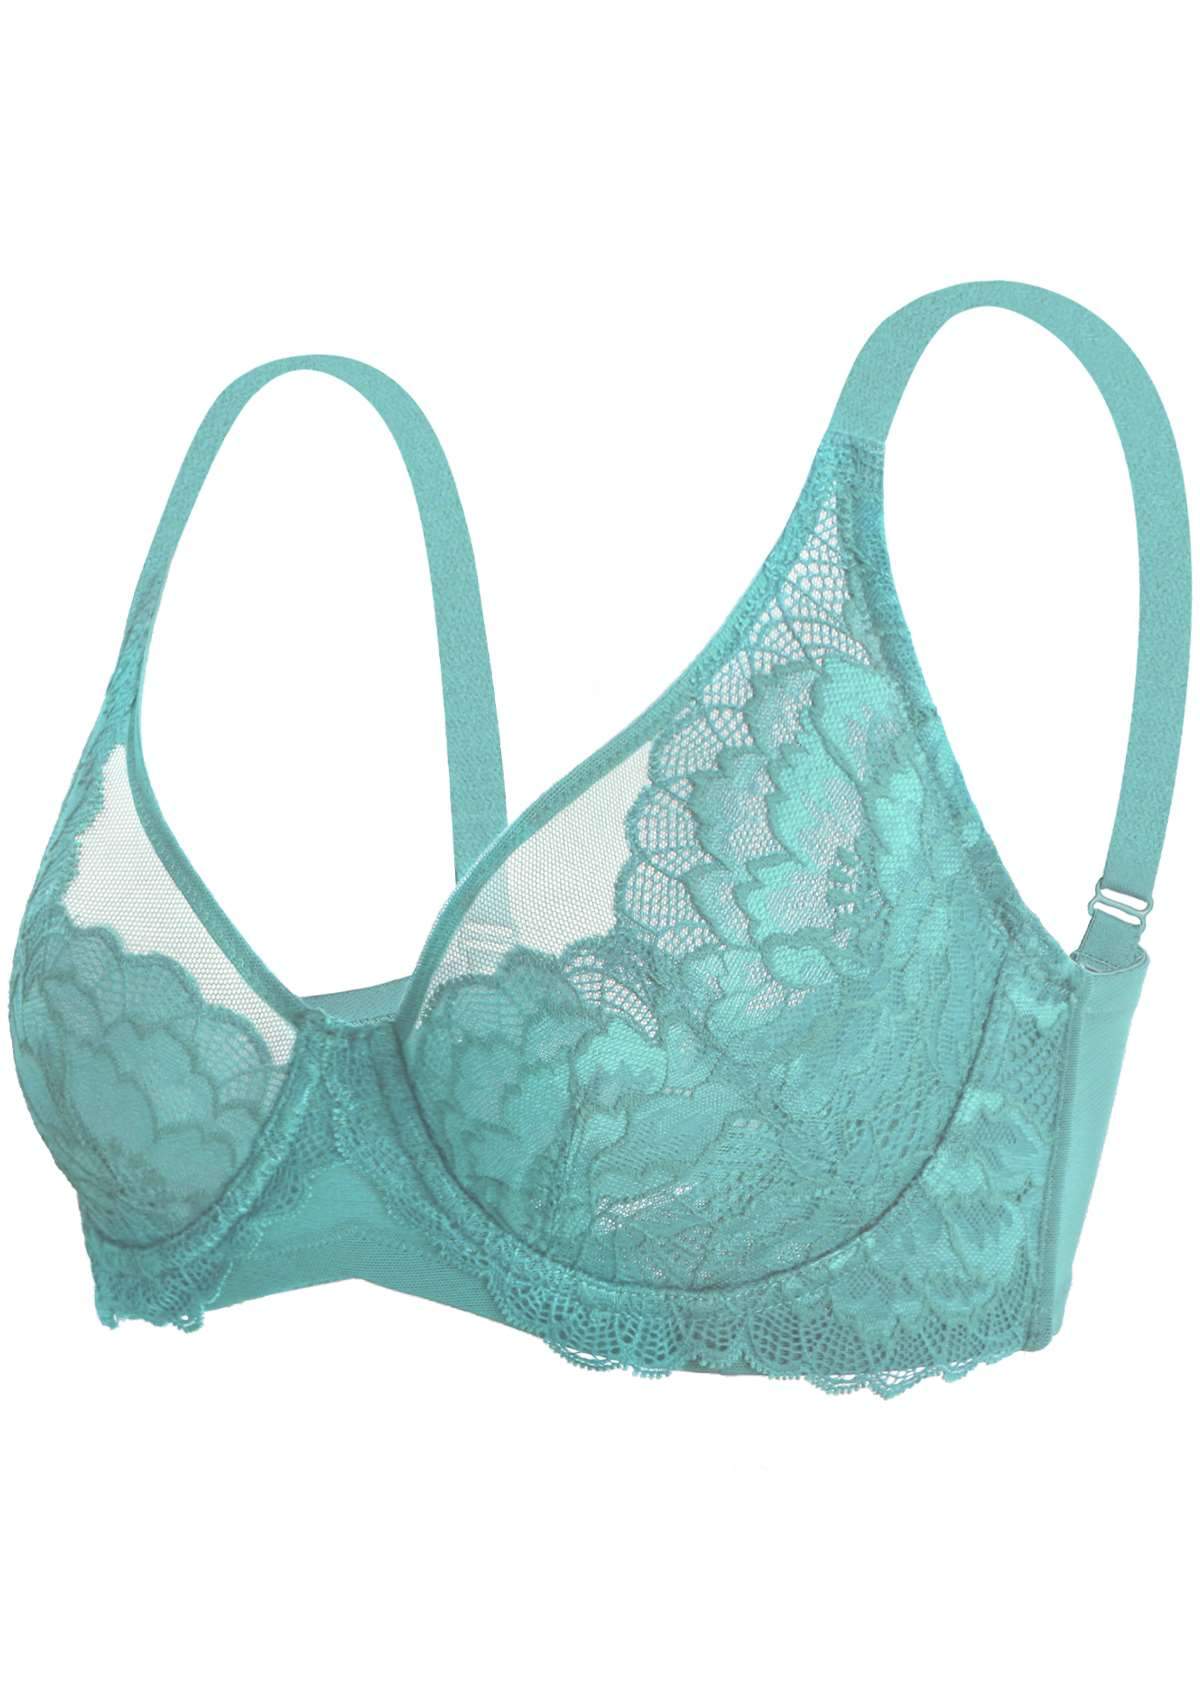 HSIA Paeonia Lace Full Coverage Underwire Non-Padded Uplifting Bra - Teal / 38 / D